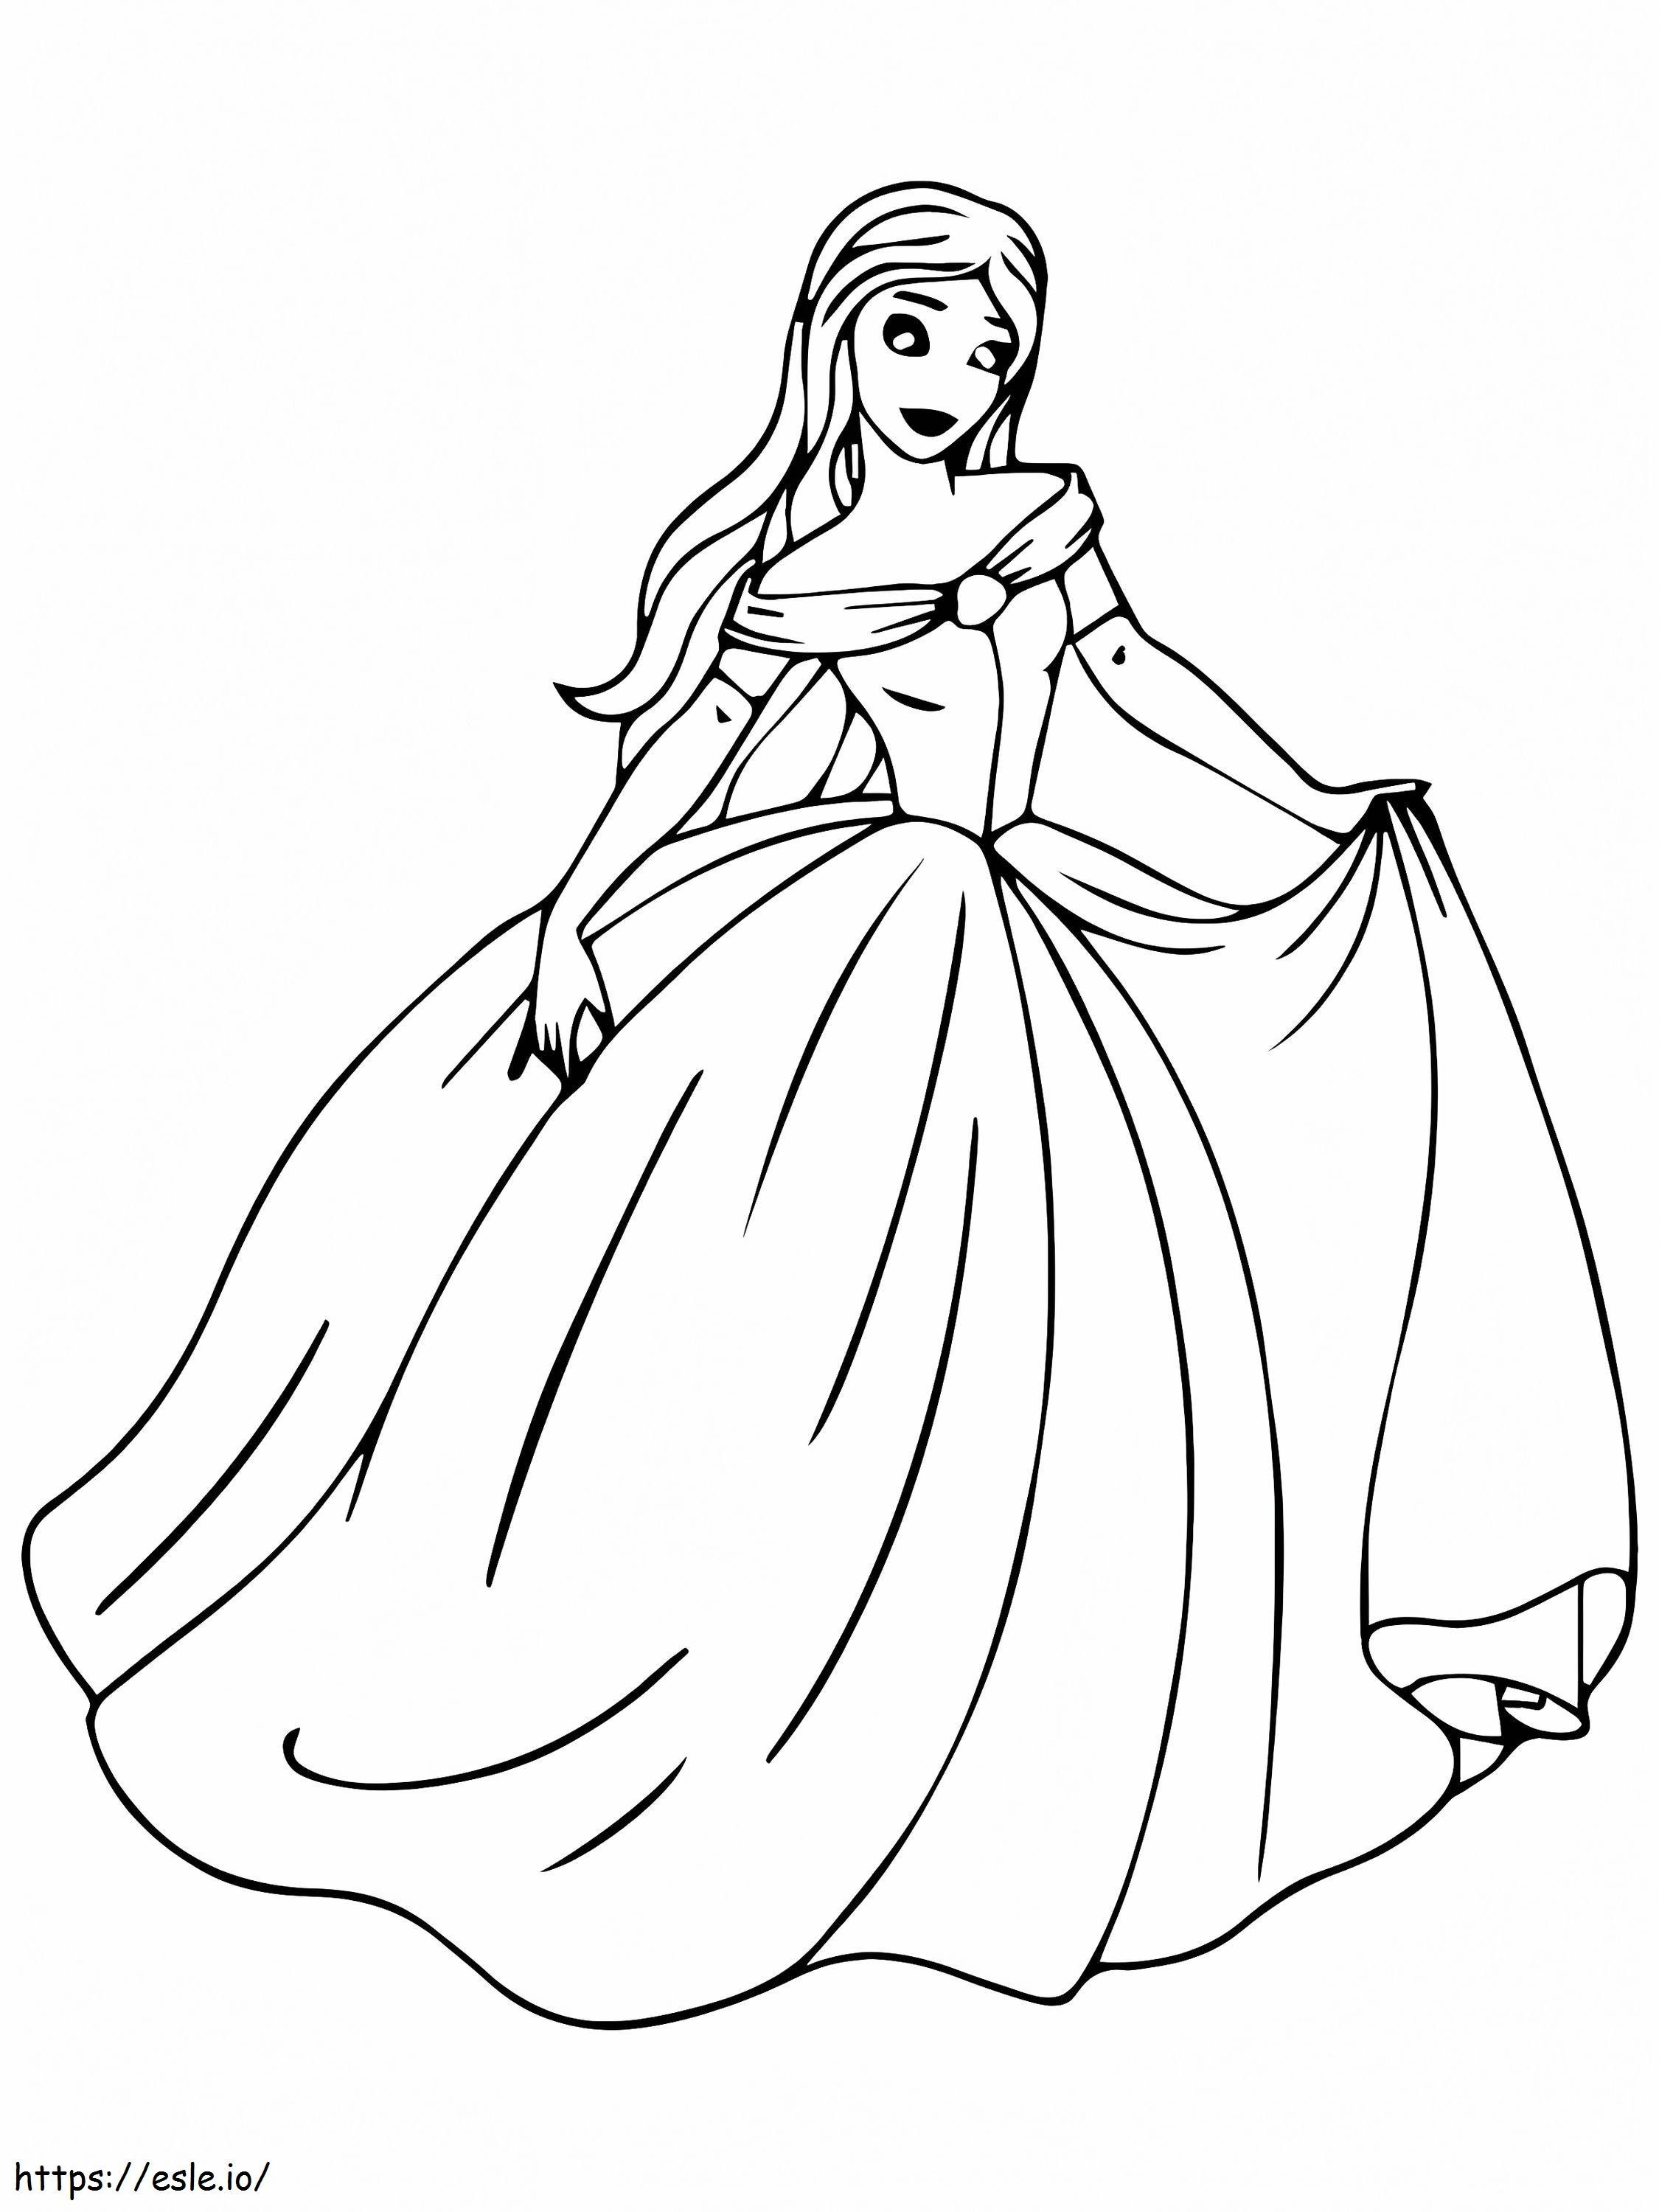 Elegant Princess And The Pea coloring page